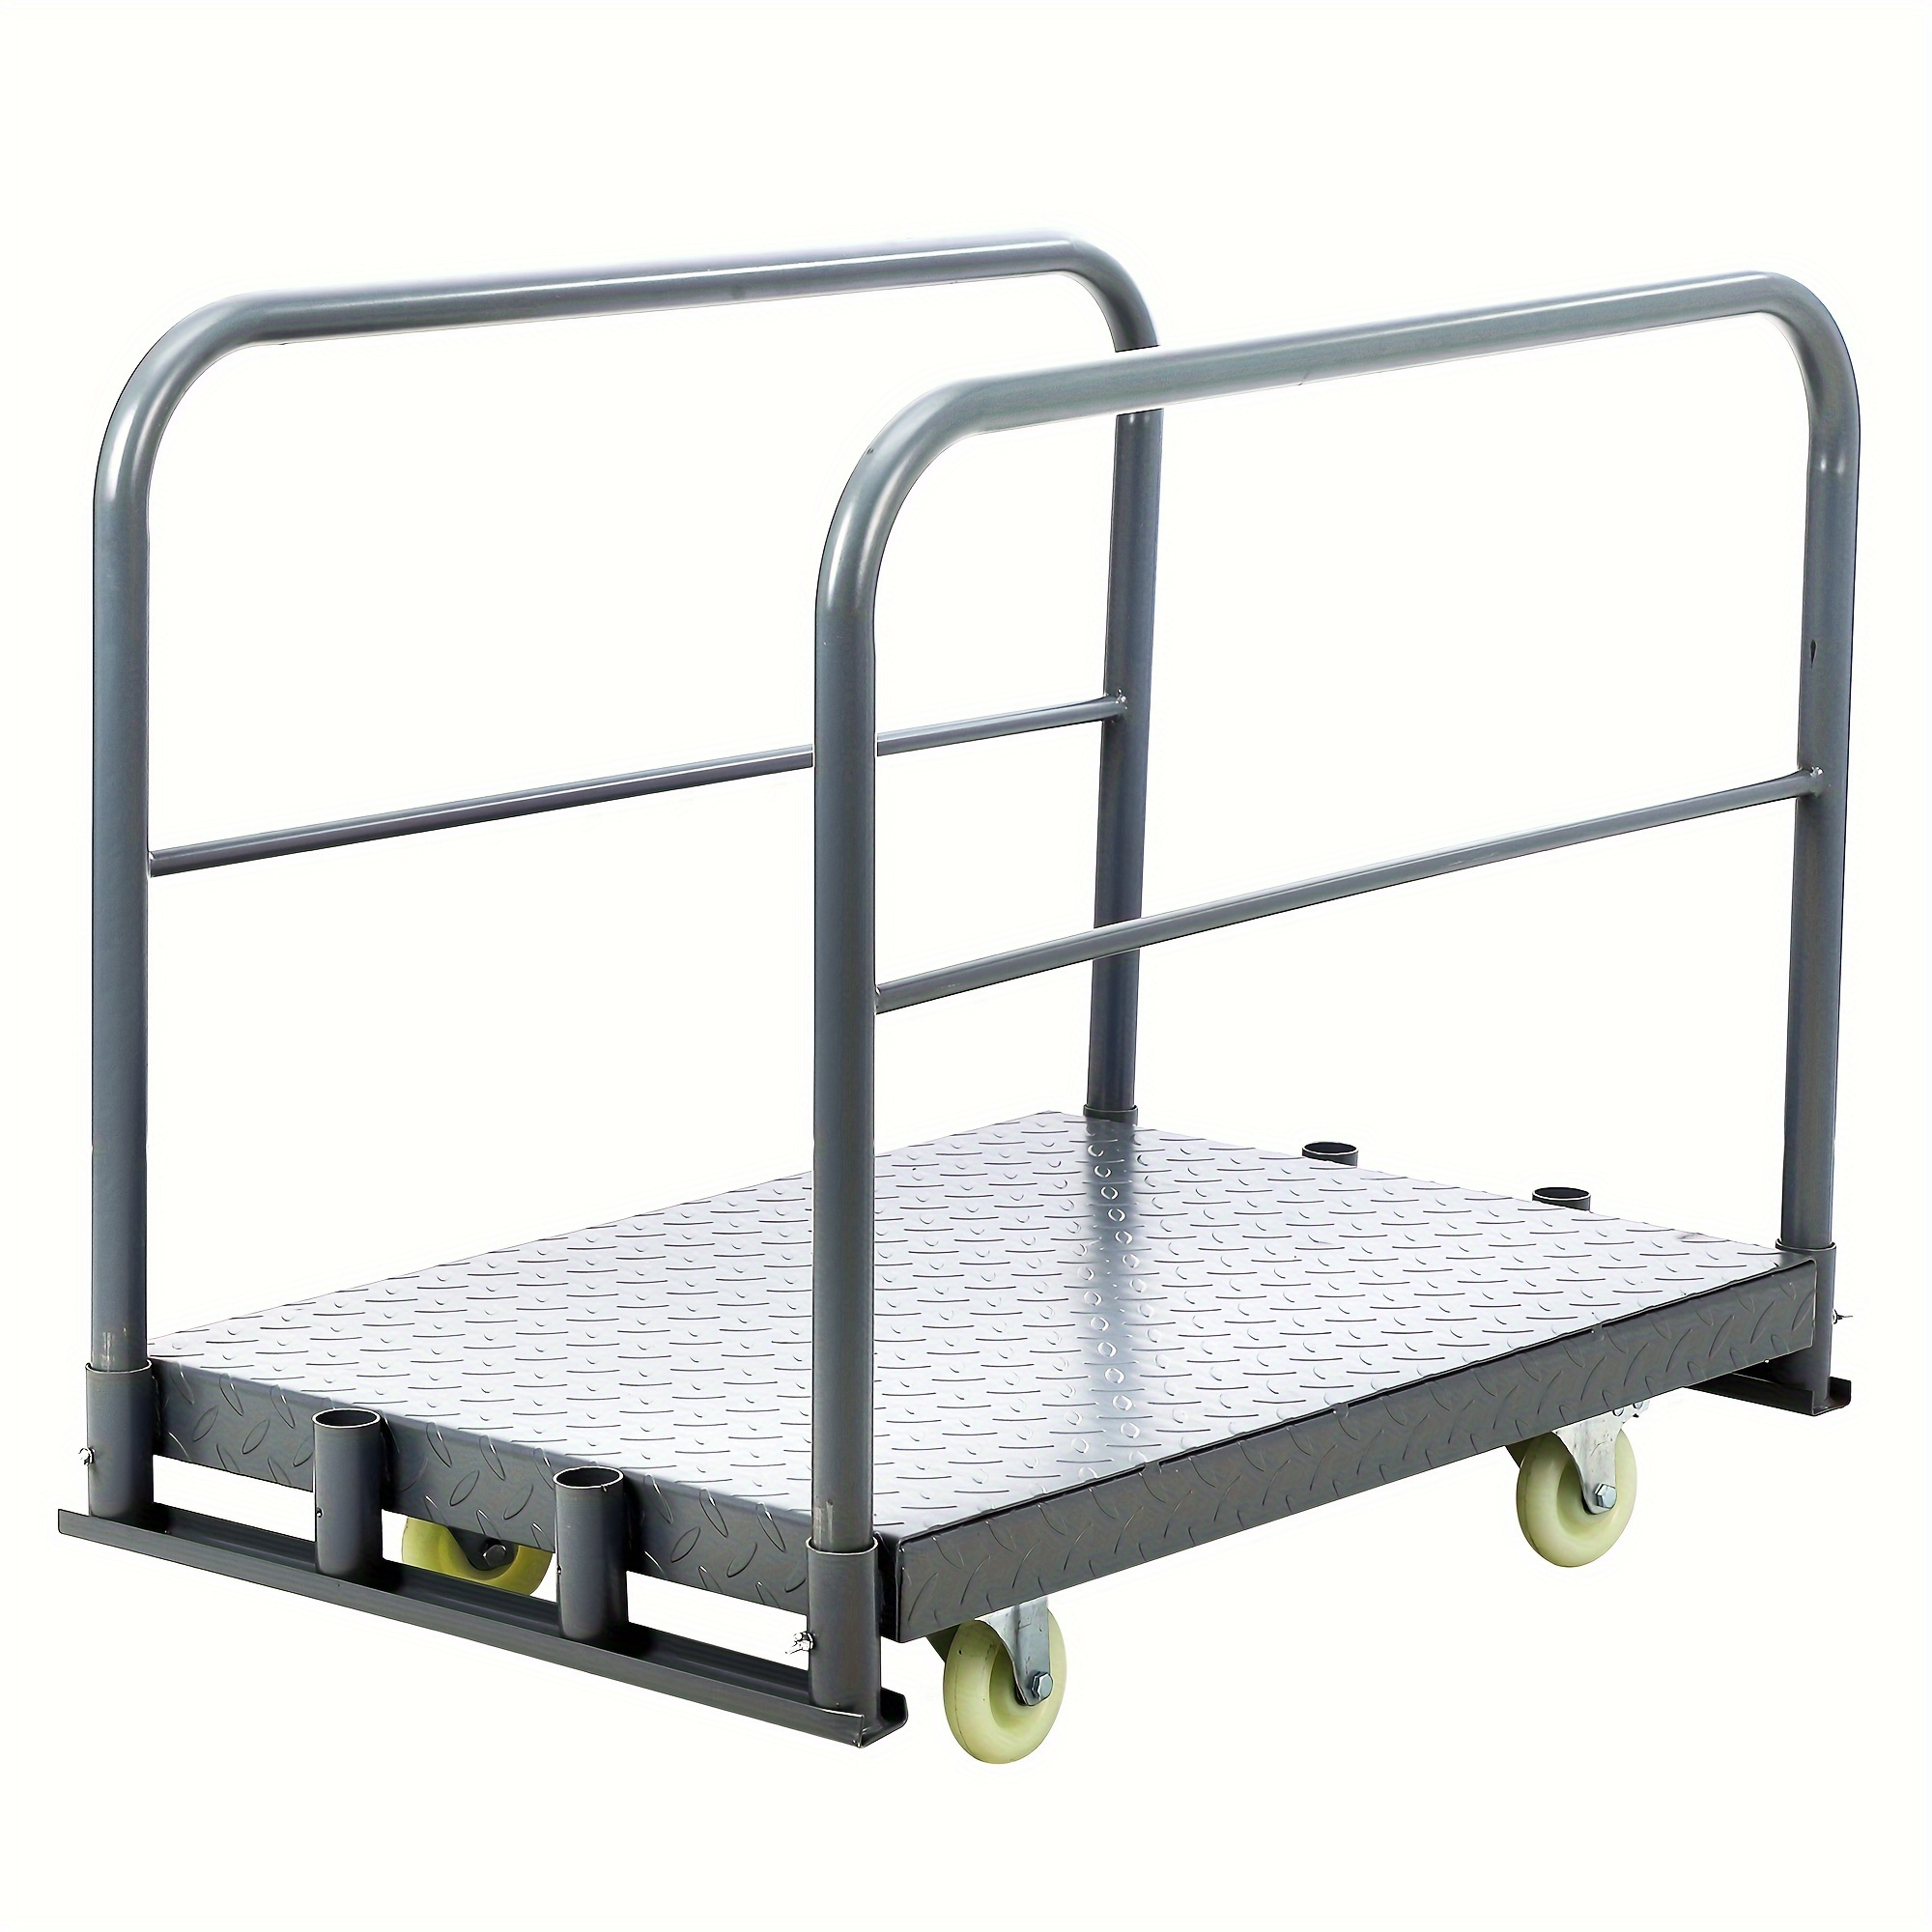 

Steel Panel Truck Cart, Platform Truck Cart, Heavy Duty Lumber Cart Drywall Dolly Cart, Flatbed Cart With 2000 Lbs Capacity And 4 Swivel Casters Cart For Carry Objects